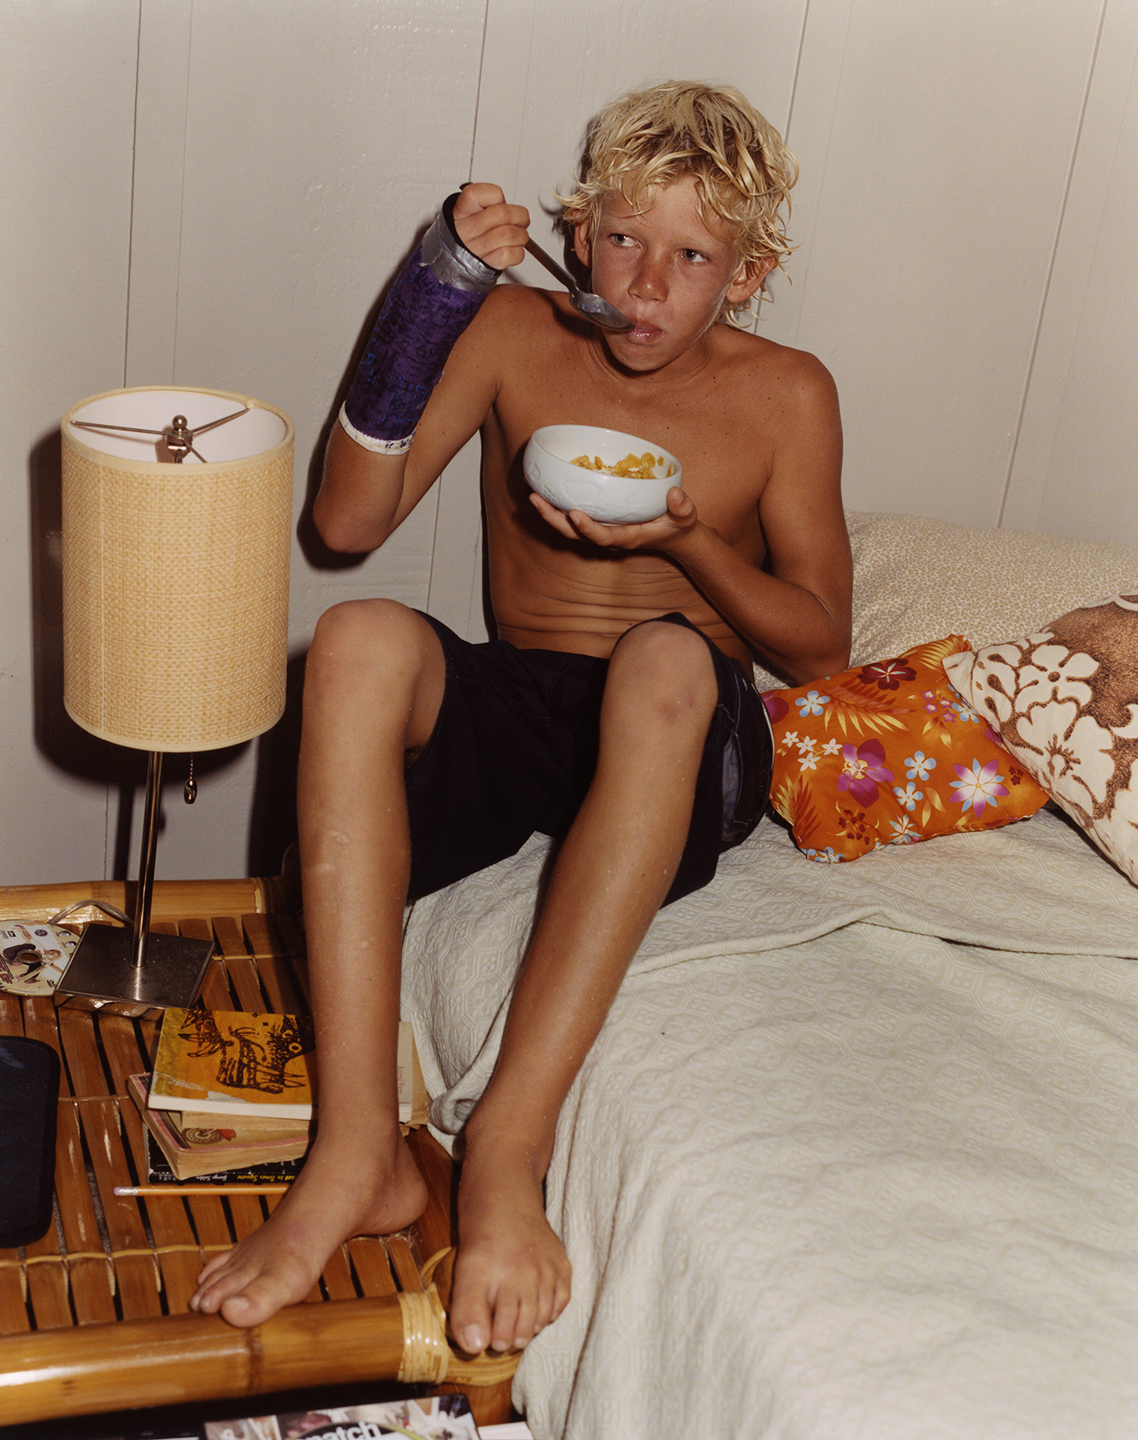 Breakfast or dinner? At home with John John Florence on the North Shore, Hawaii. 2005.